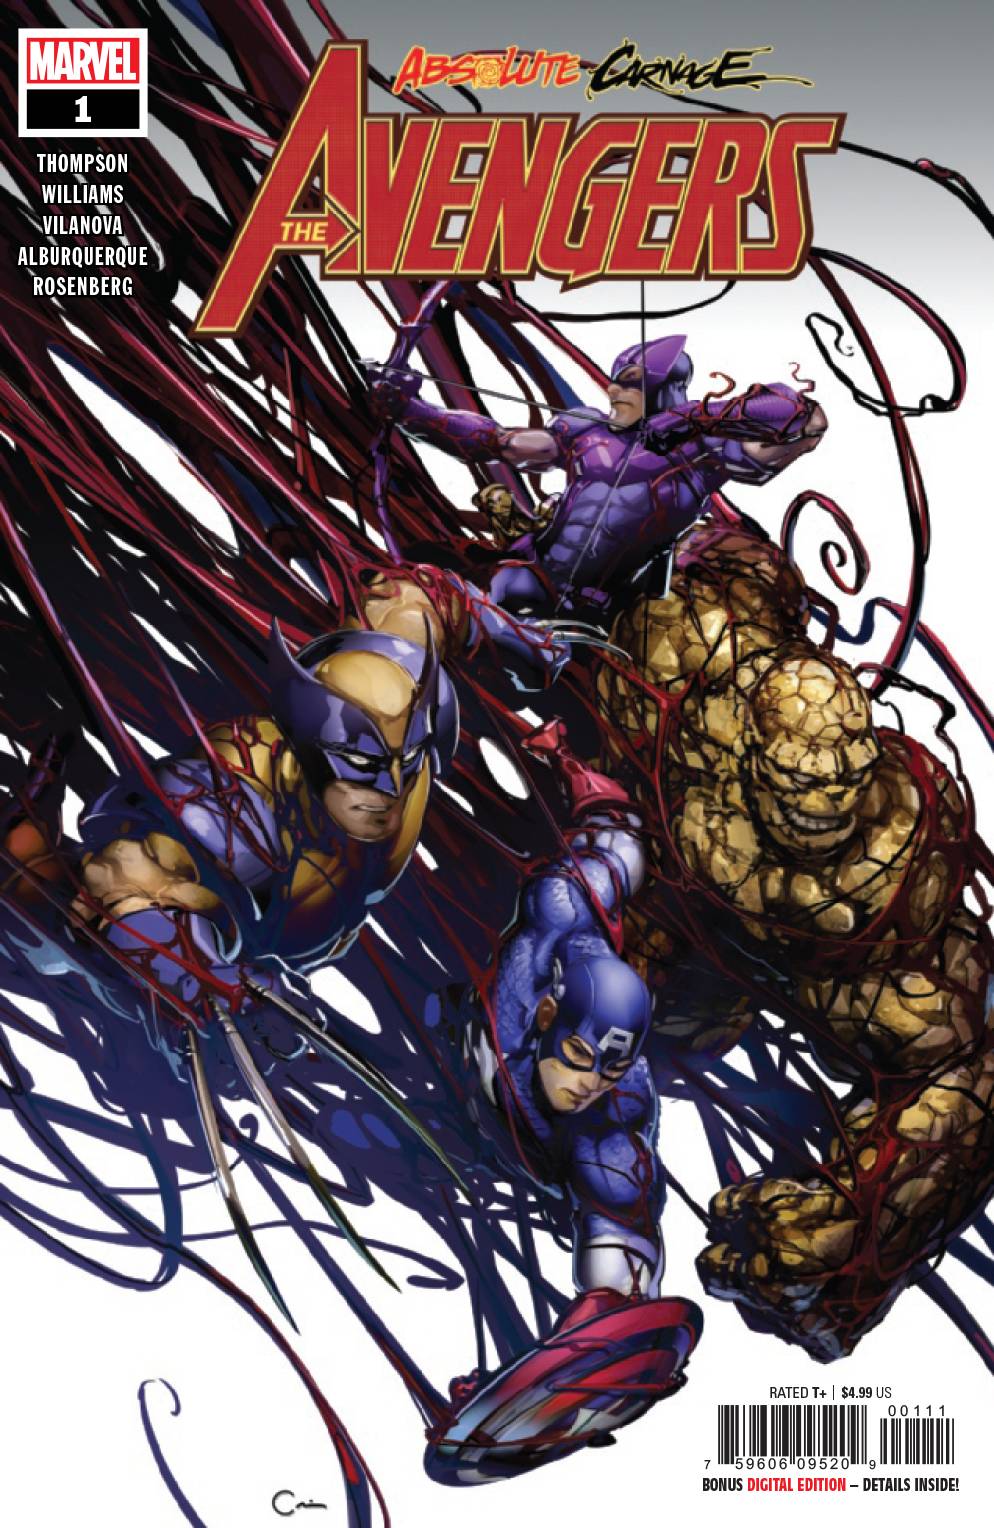 Absolute Carnage Avengers #1